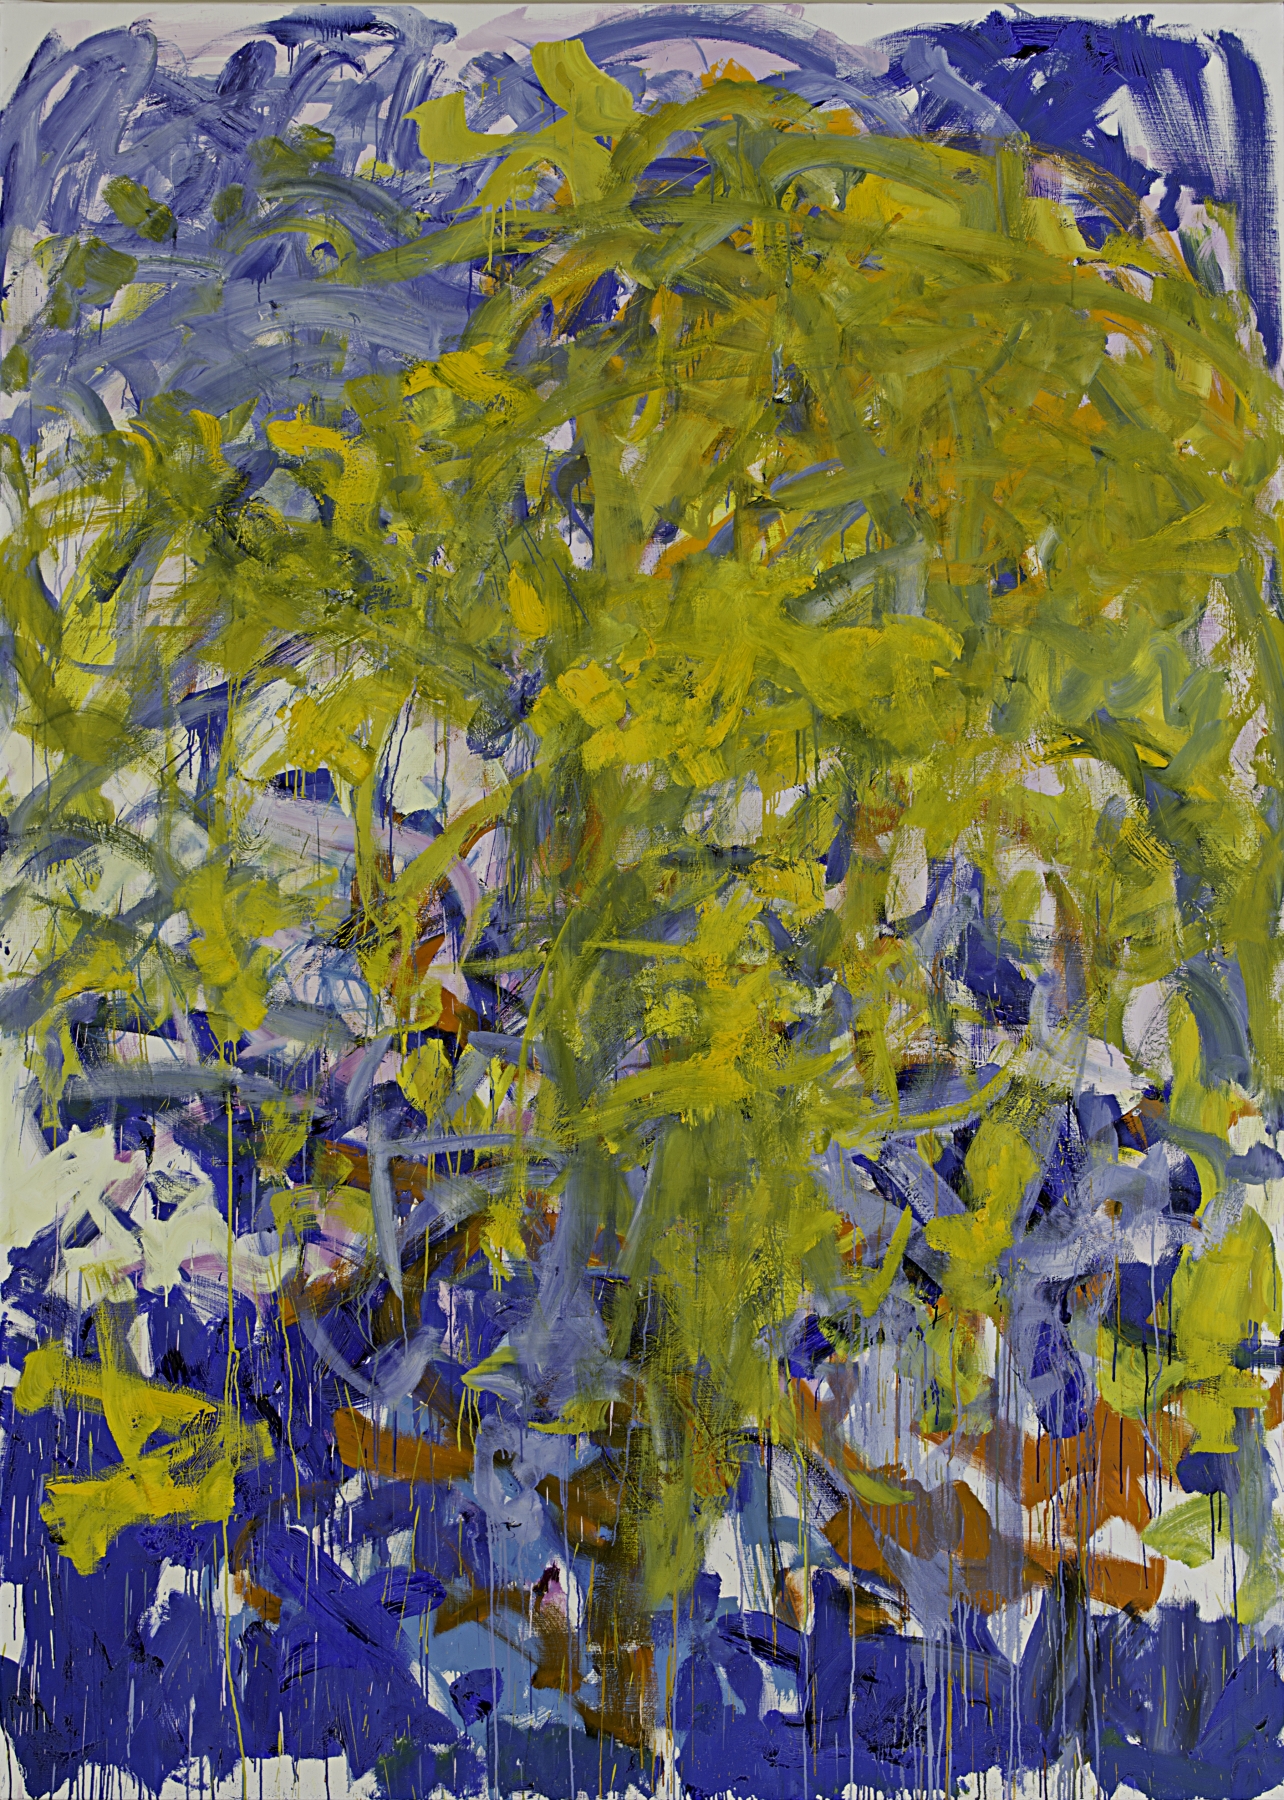 Before Again III

1985

Oil on canvas

110 x 78 inches

279.4 x 198.1 cm